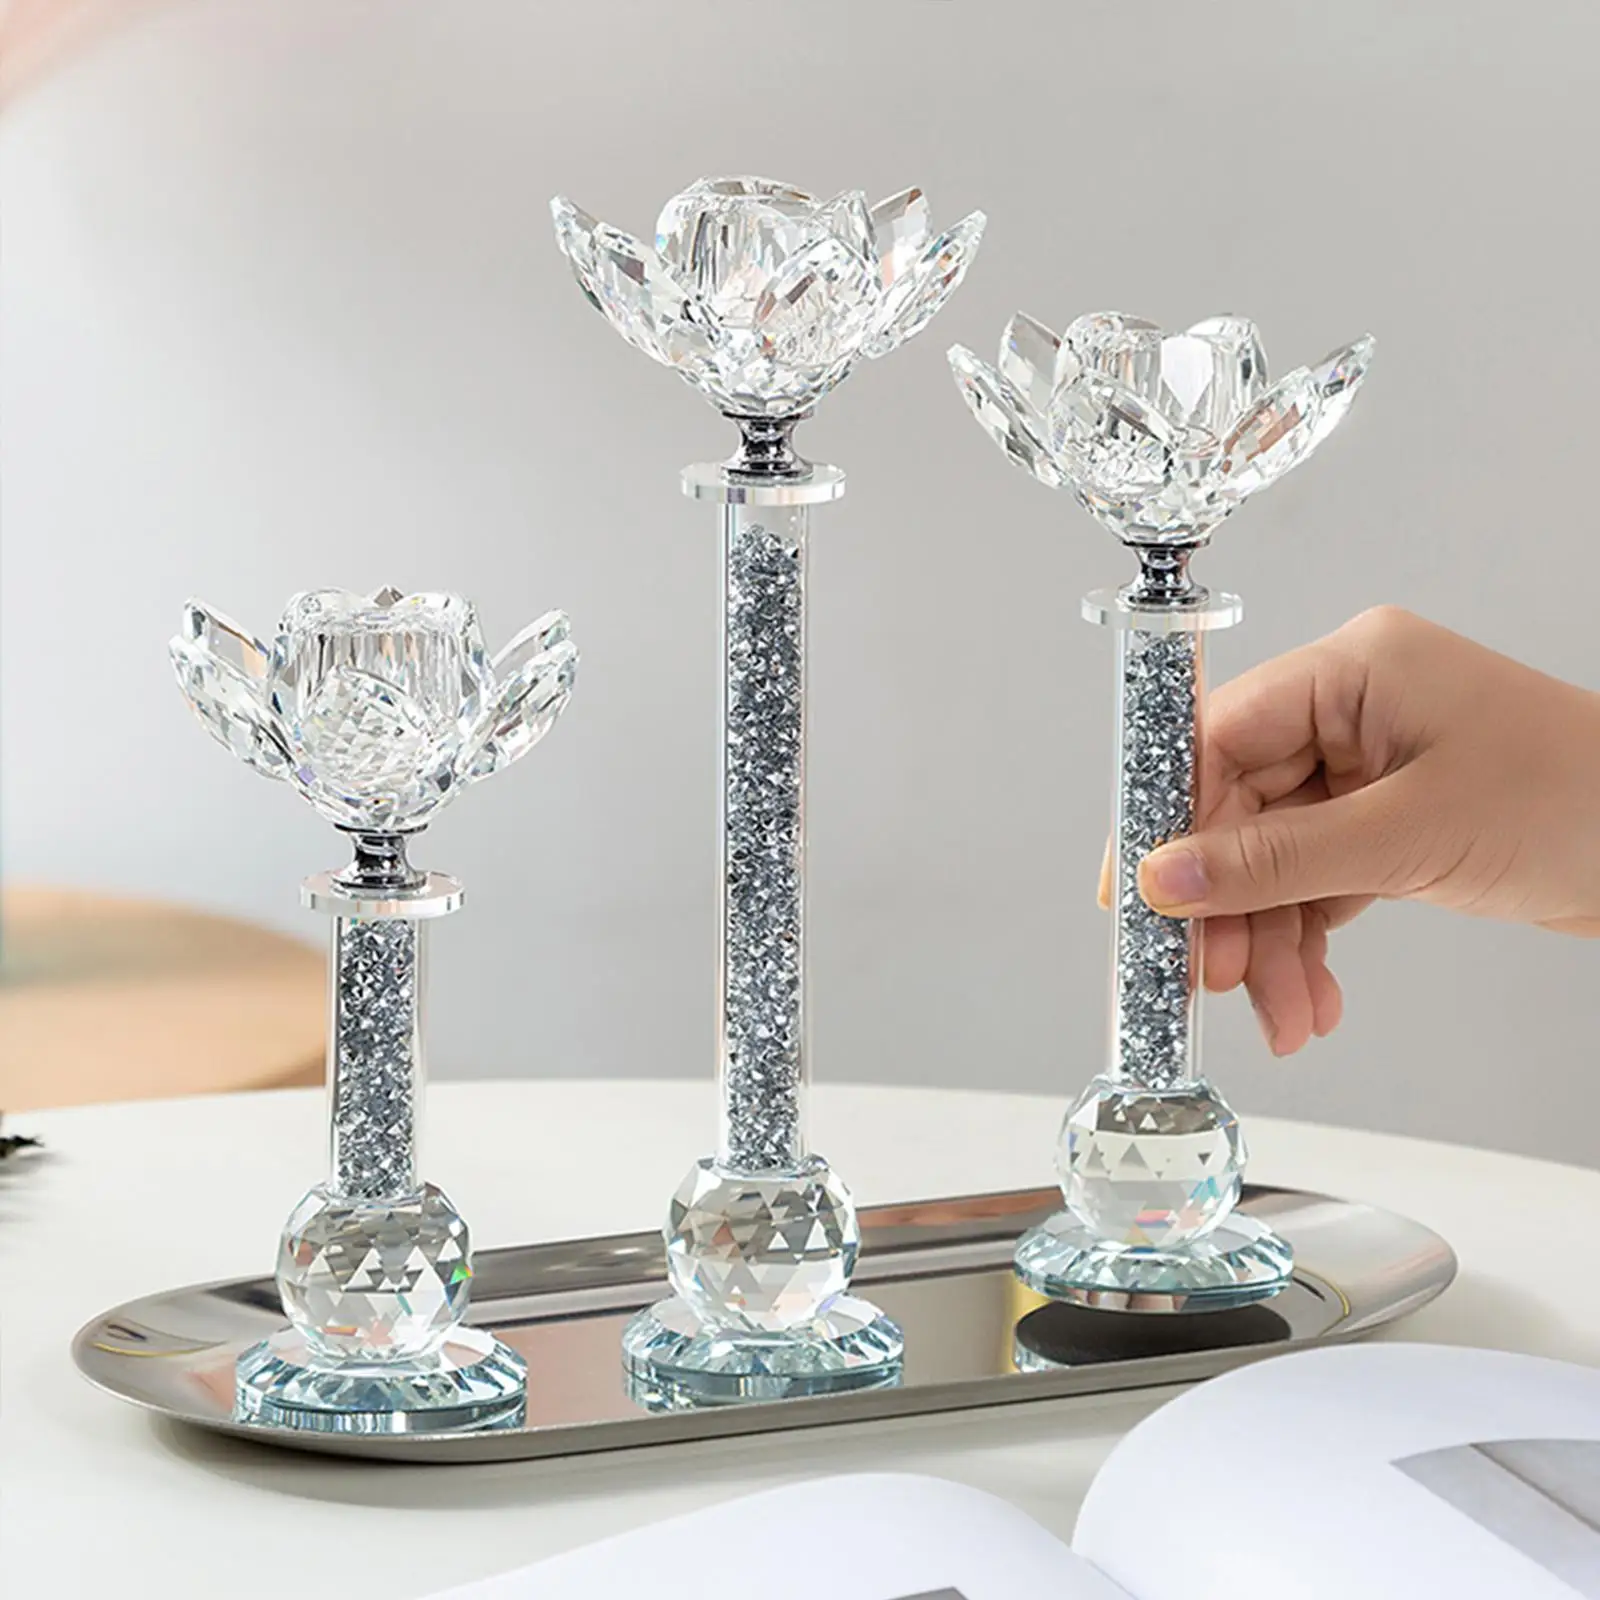 3Pcs Pillar Candle Holder Tealight Candlestick European Candle Stand for Home Decor